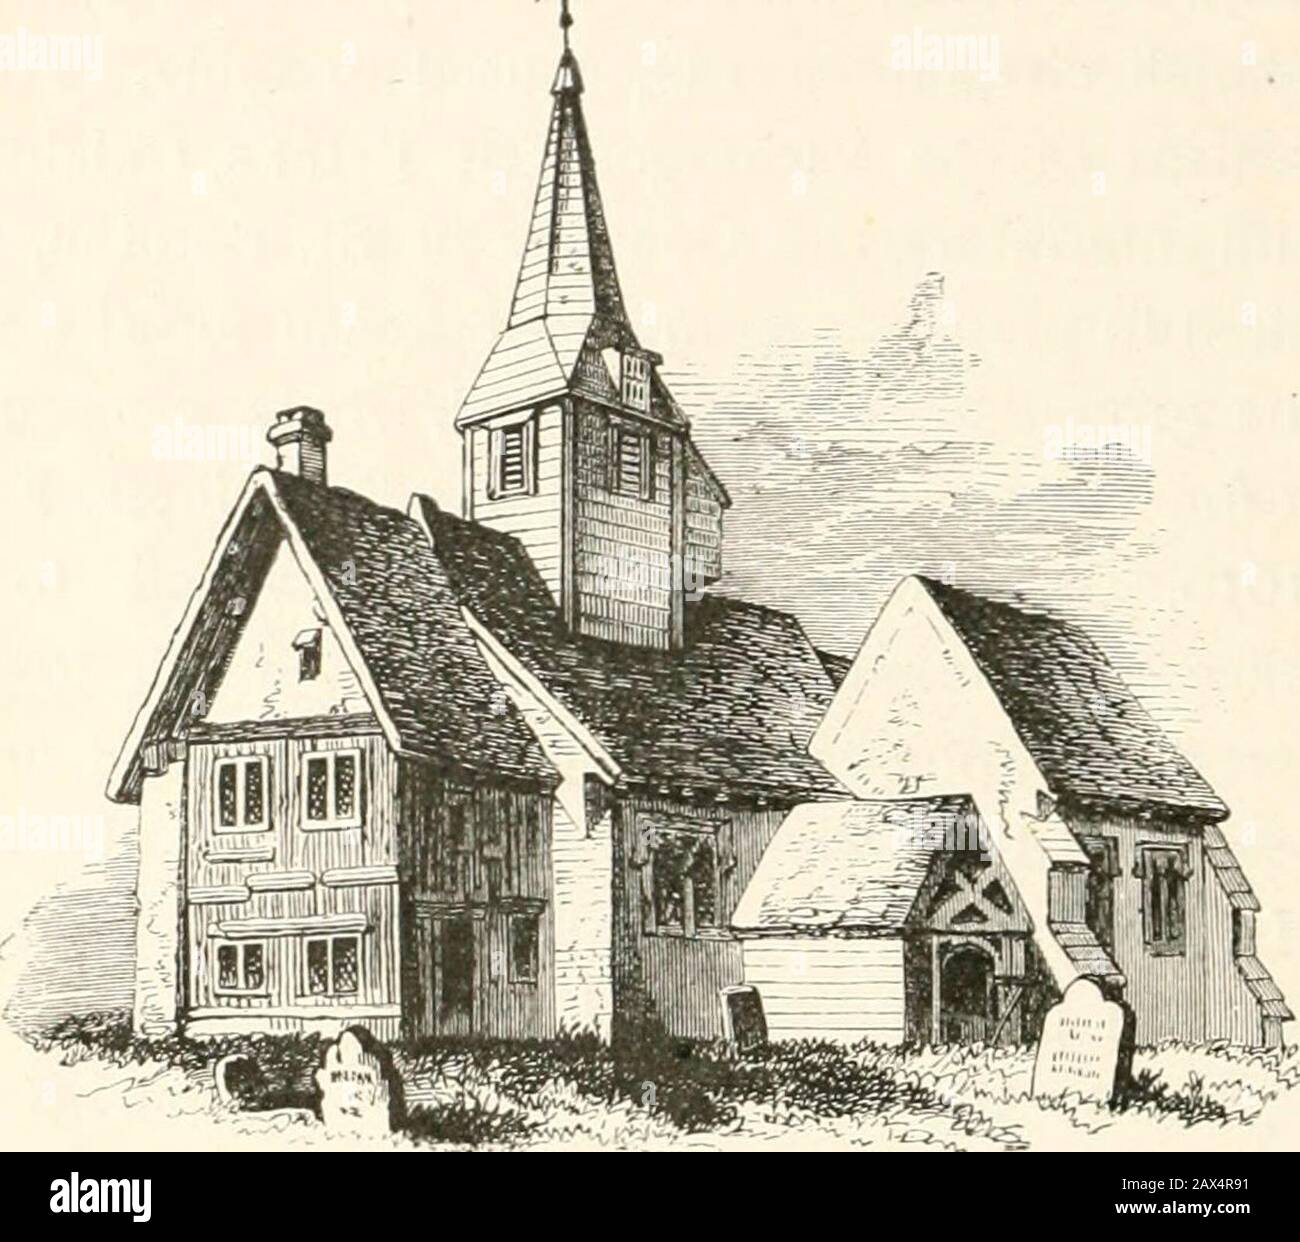 Parish priests and their people in the middle ages in England . without turella, however; two granges; the otherhouses are sufficient ; the gardens are eaten up with age and badlykept. Branscombe Manor. There is a hall with two chambers andgarderobes good and sufficient; a new kitchen with a good Uirella;all the other houses in good condition ( Register of Bishop Grandis-son, part i. p. 572). * Clive, in the diocese of Worcester, was appropriated to WorcesterPriory ; formerly the rector lived in the Aula Fetsona. In the middleof the thirteenth century the rectory house was let to a tenant. The Stock Photo